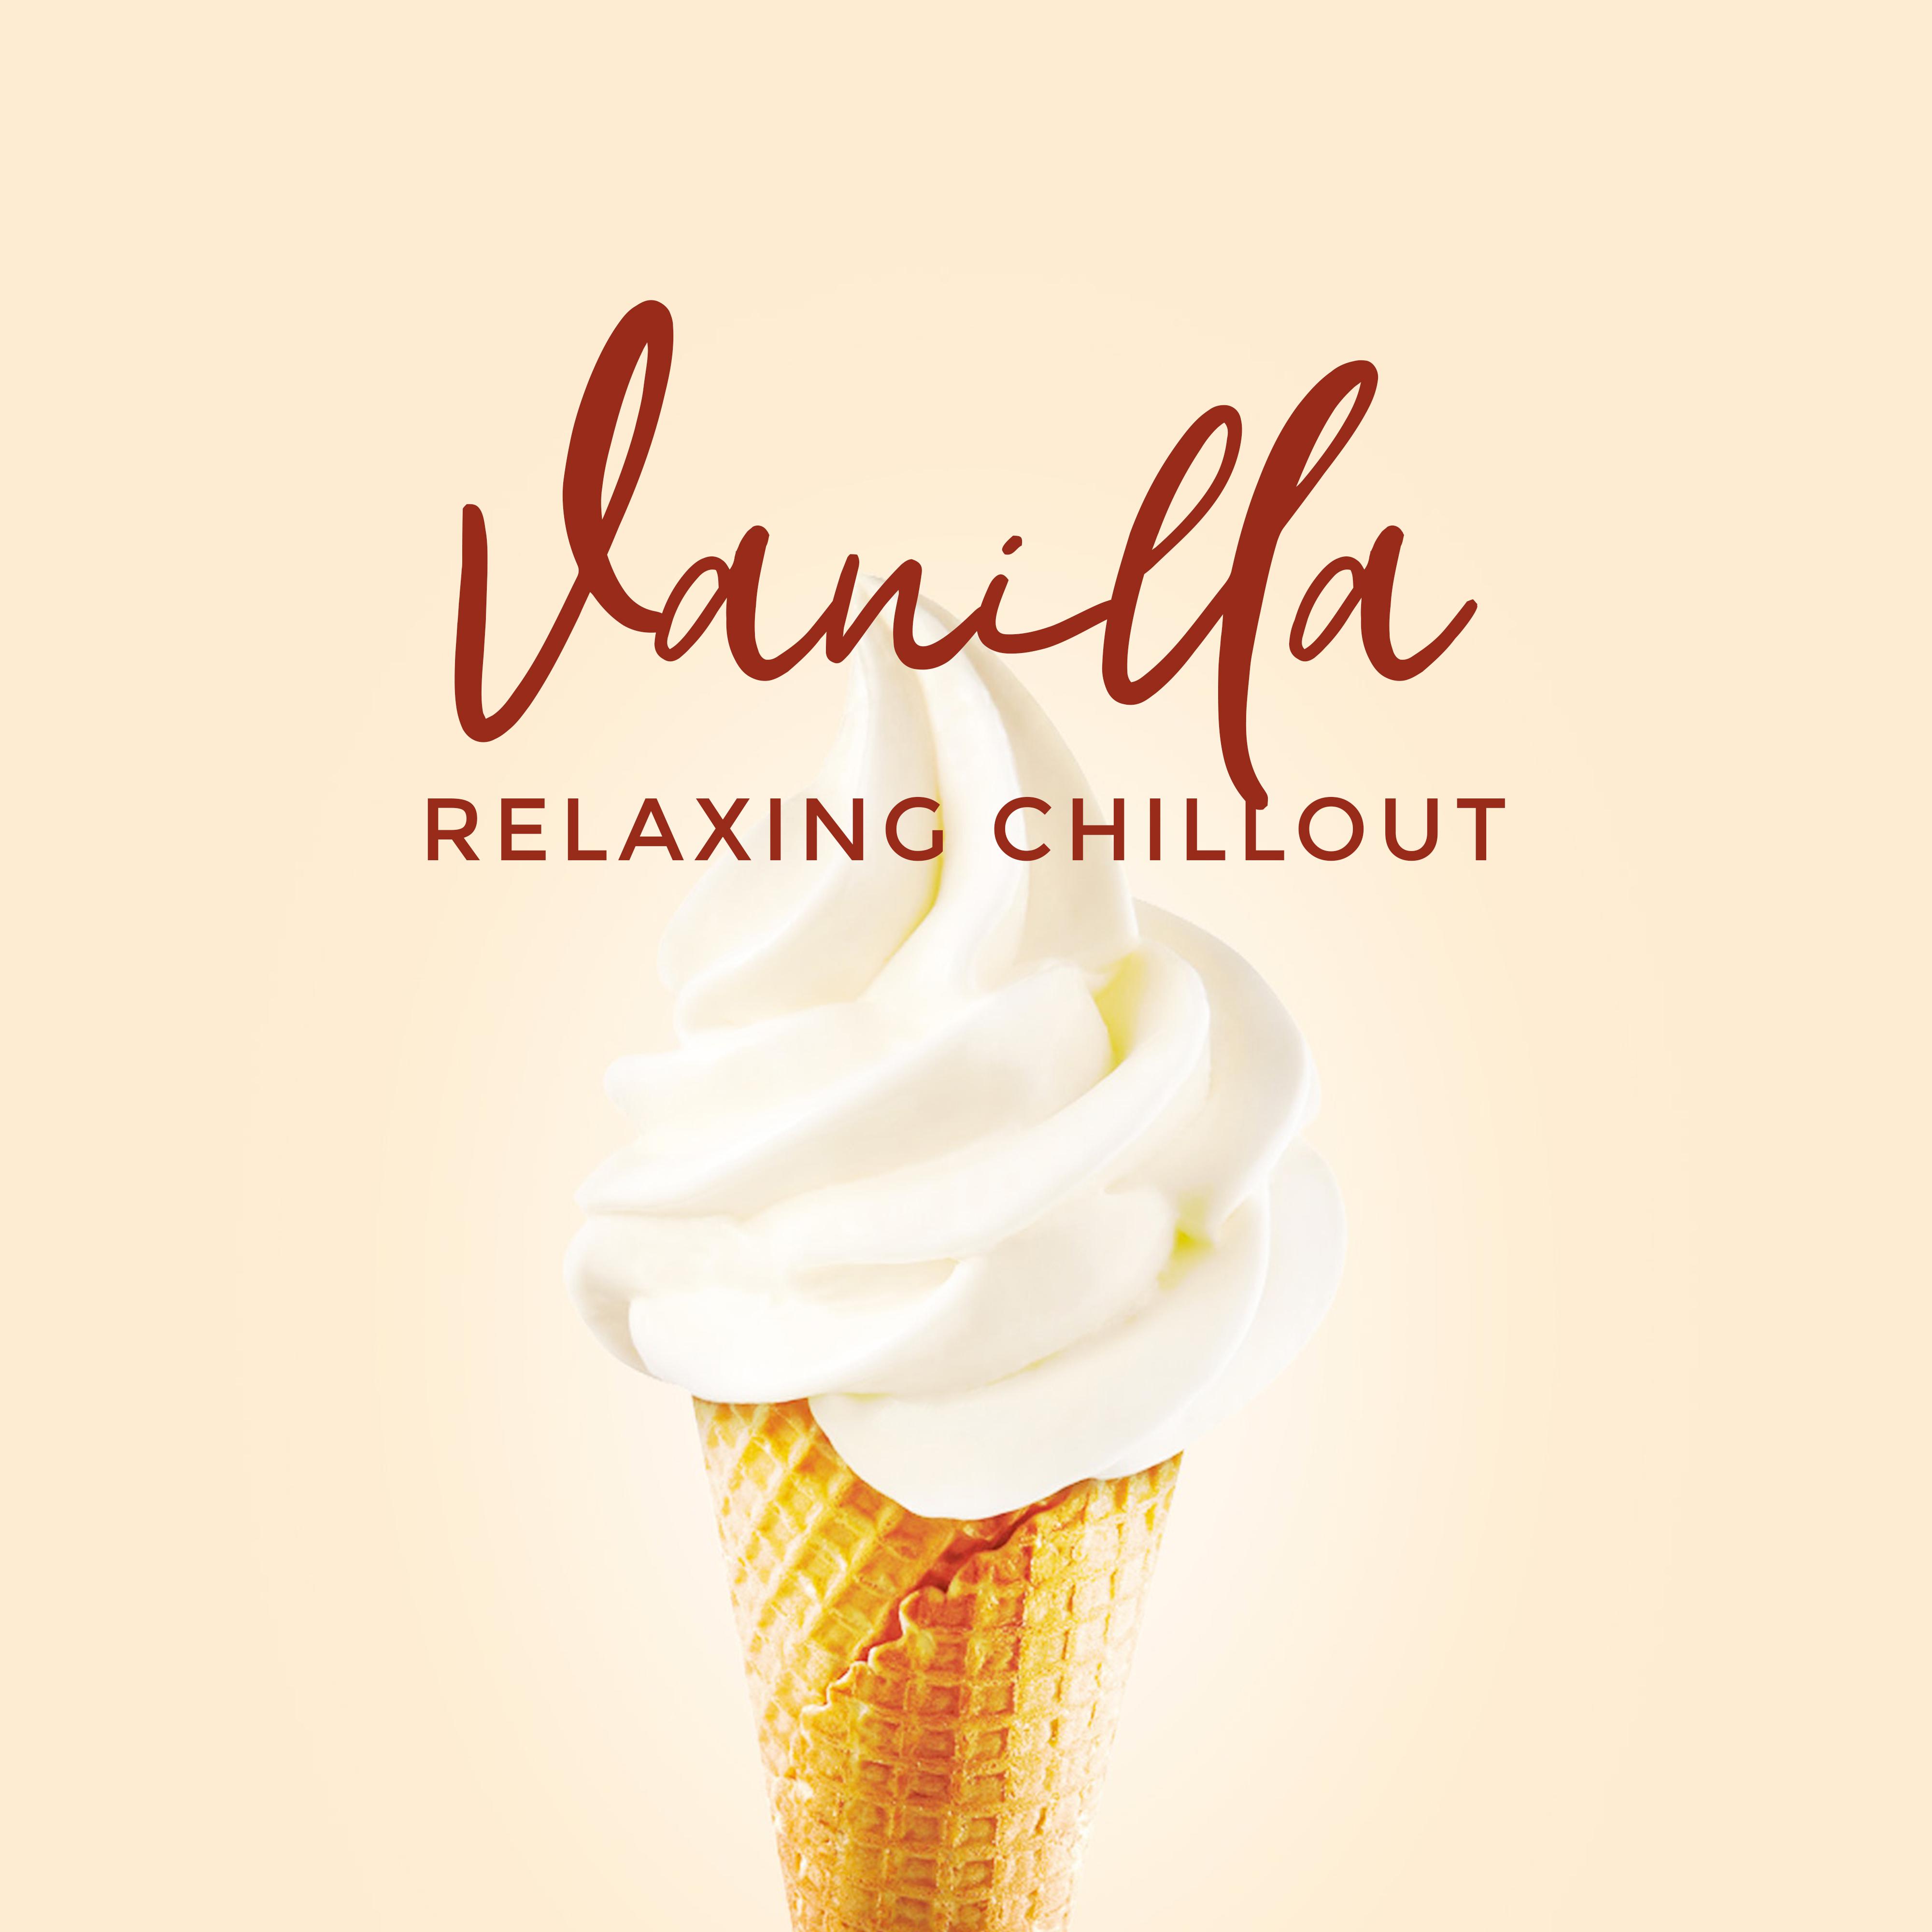 Vanilla Relaxing Chillout: Selection of 15 Top Chill Out Calming 2019 Songs, Smooth Velvet Vibes, Beach Lounge, Holiday Rest Background Sound